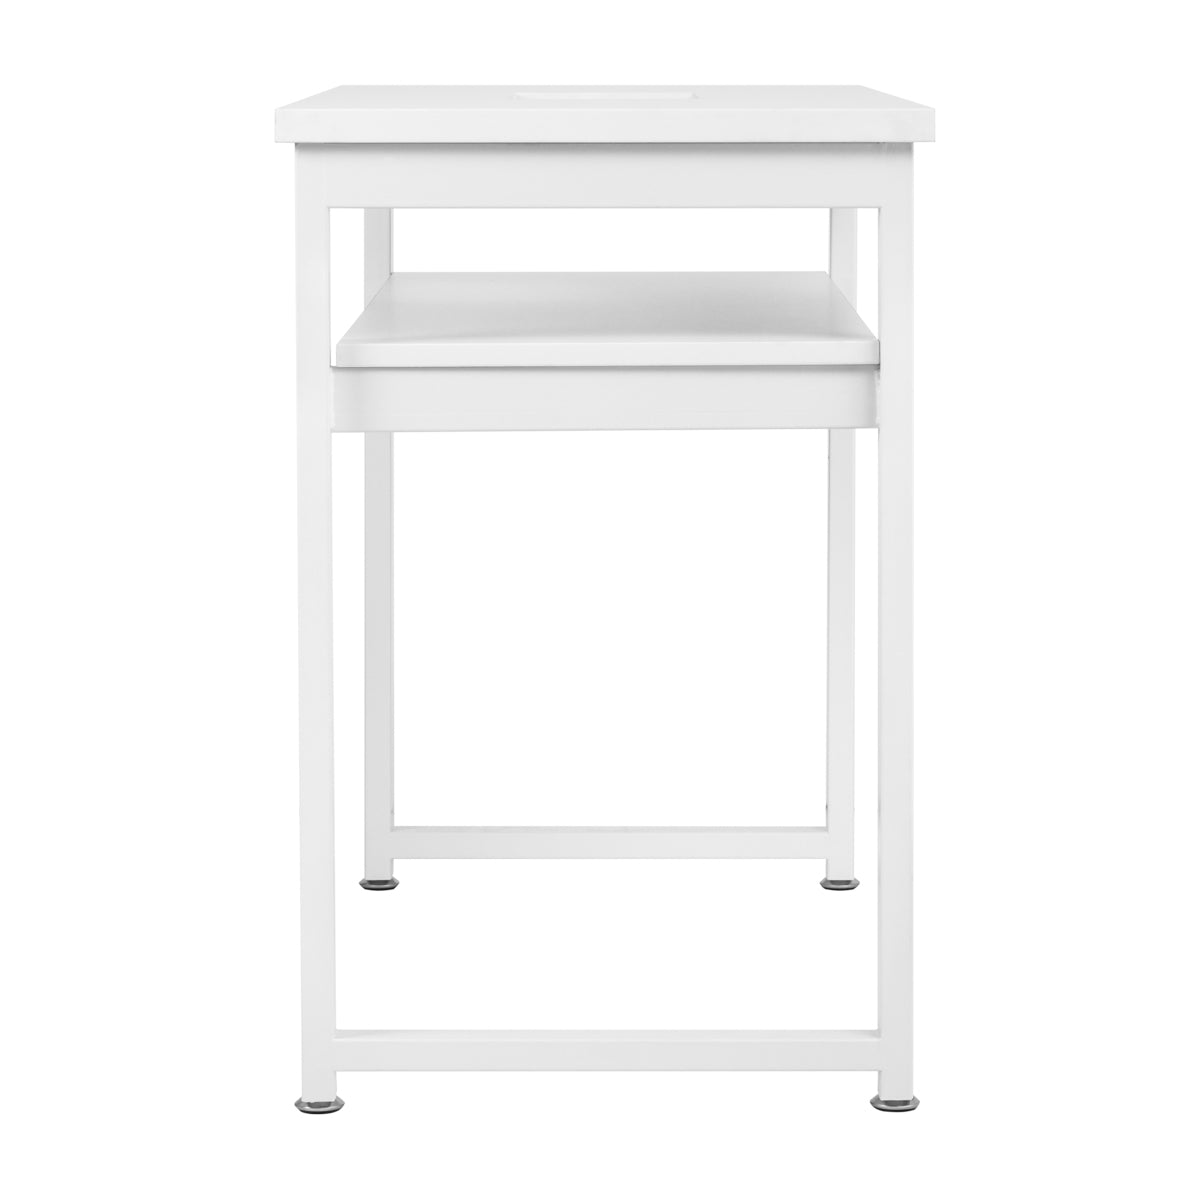 ACTIVESHOP COSMETIC DESK 23W WHITE WITH MOMO S41 LUX ABSORBER